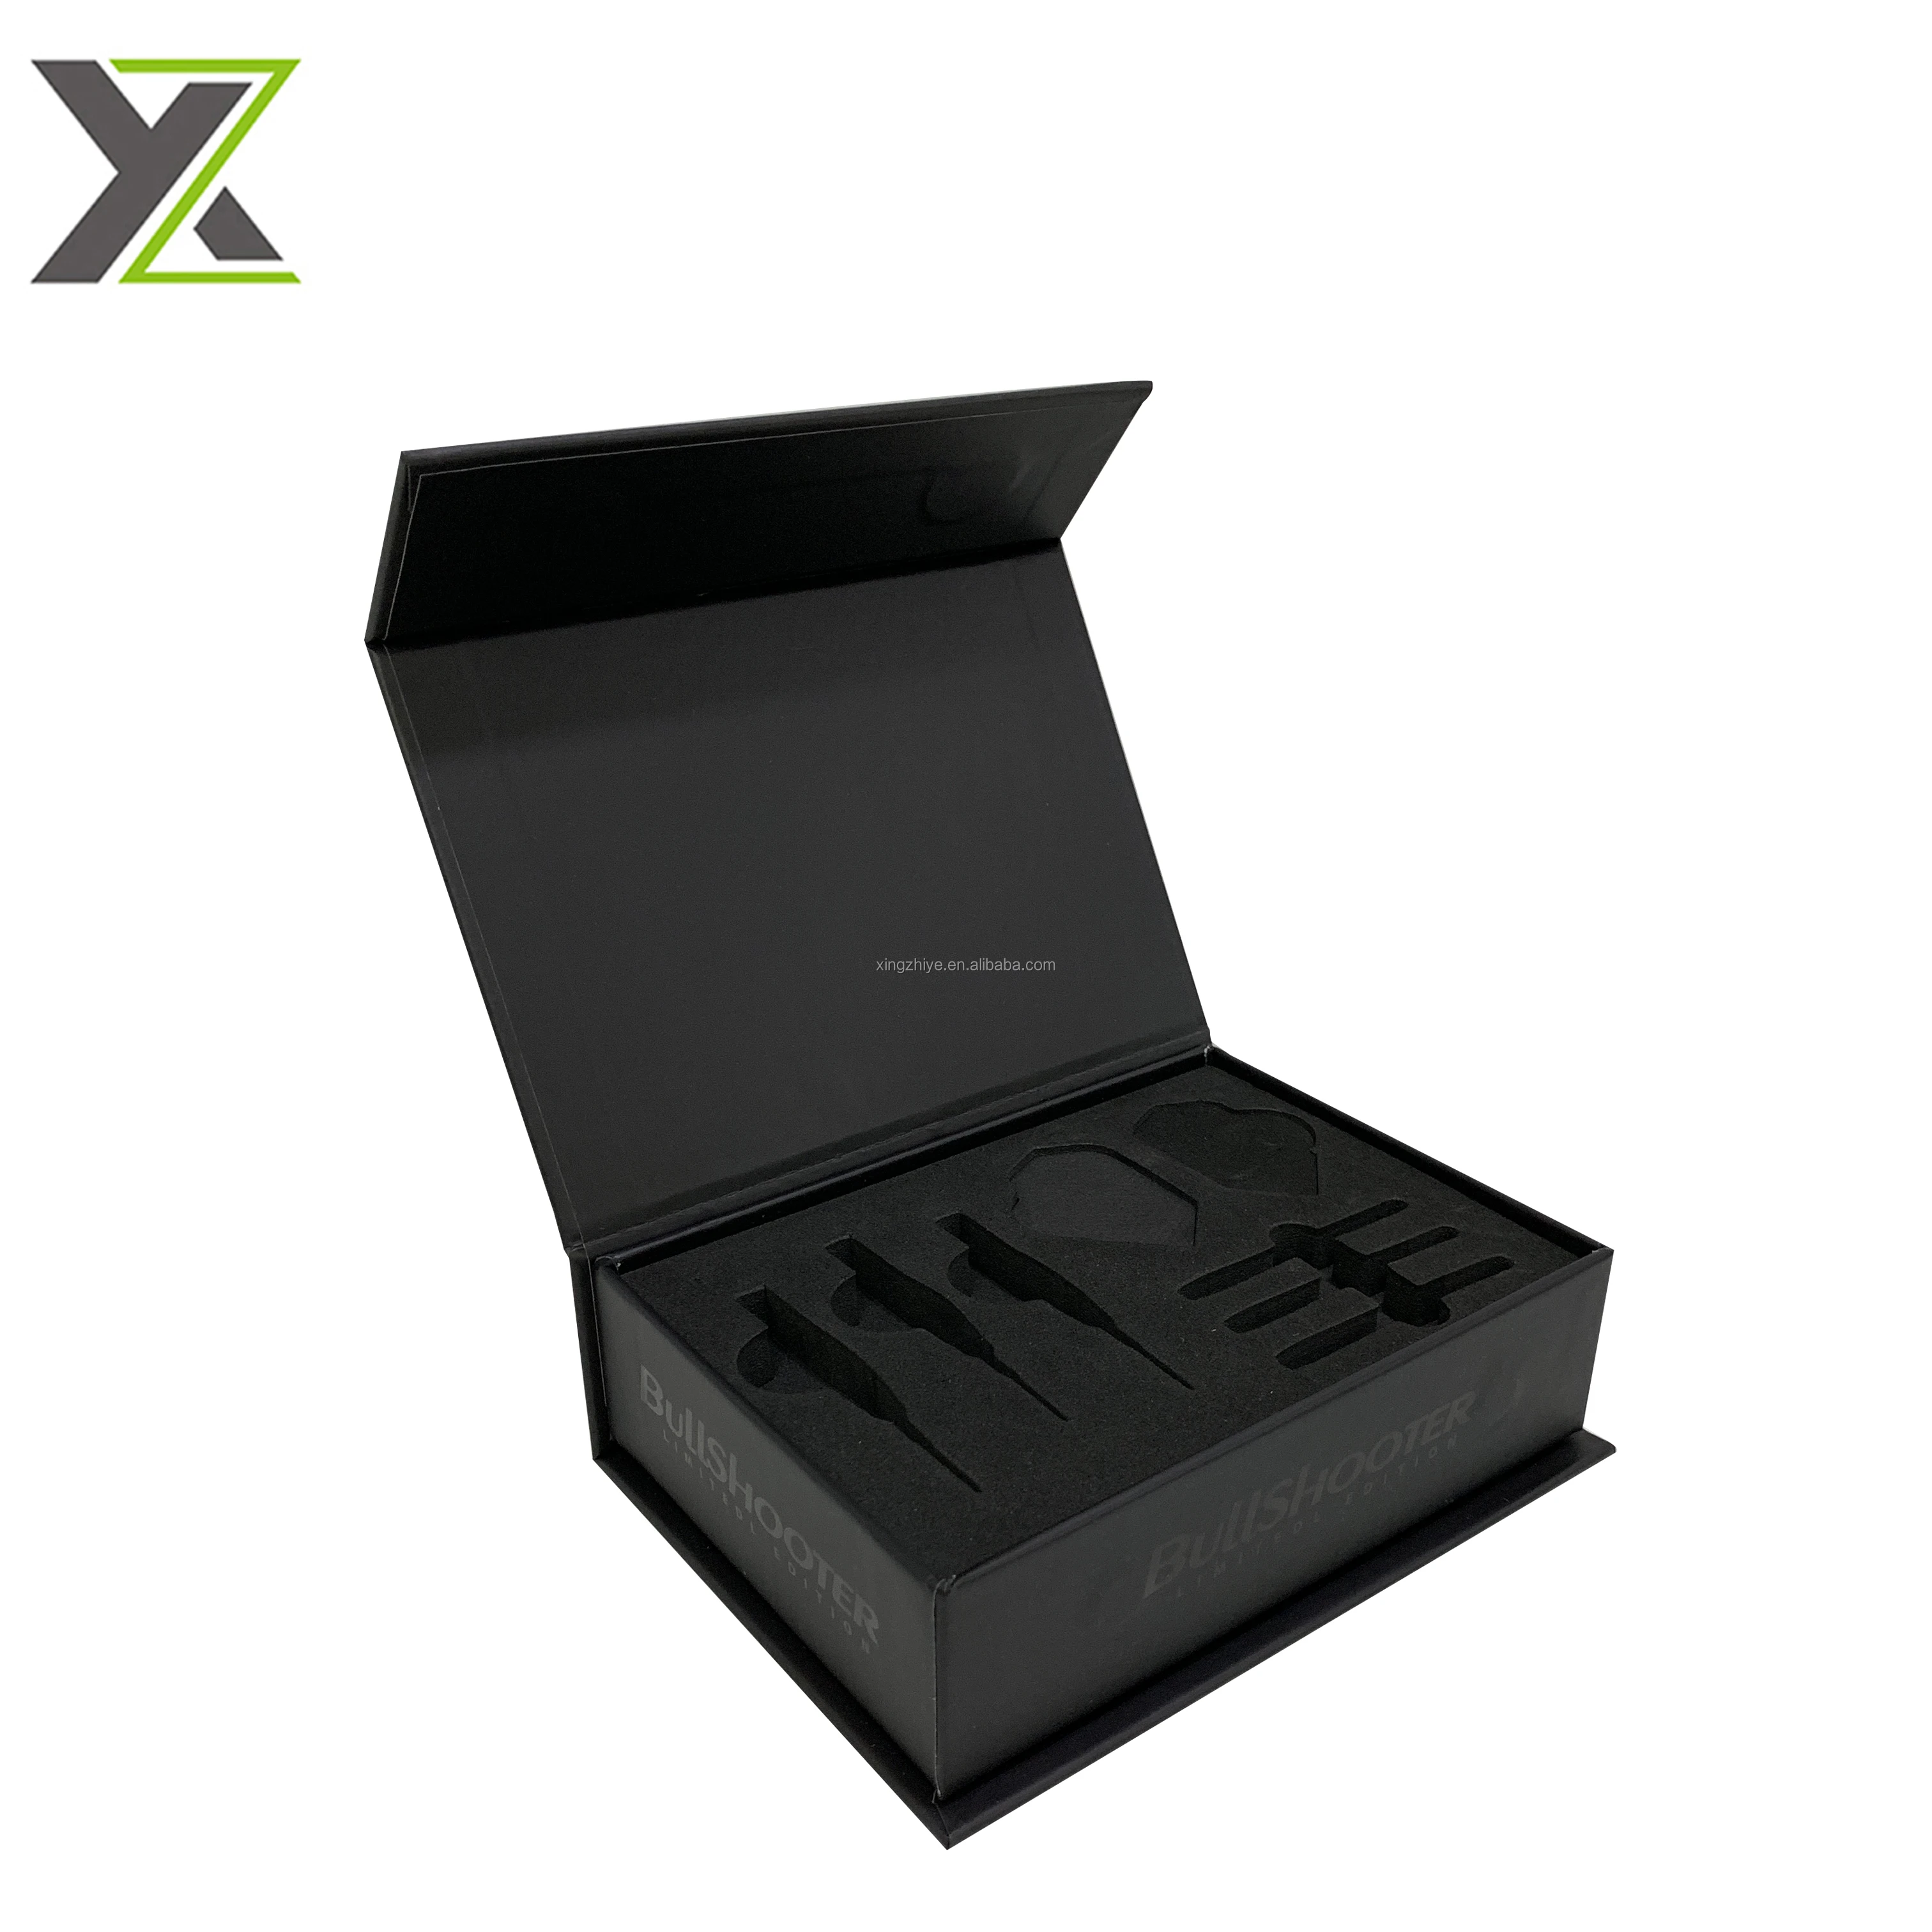 Download Custom Matte Black Magnetic Closure Cardboard Box With Eva Insert For Darts Game Buy Cardboard Boxes For Packaging Cookie Boxes With Inserts Flip Top Boxes With Magnetic Catch Product On Alibaba Com